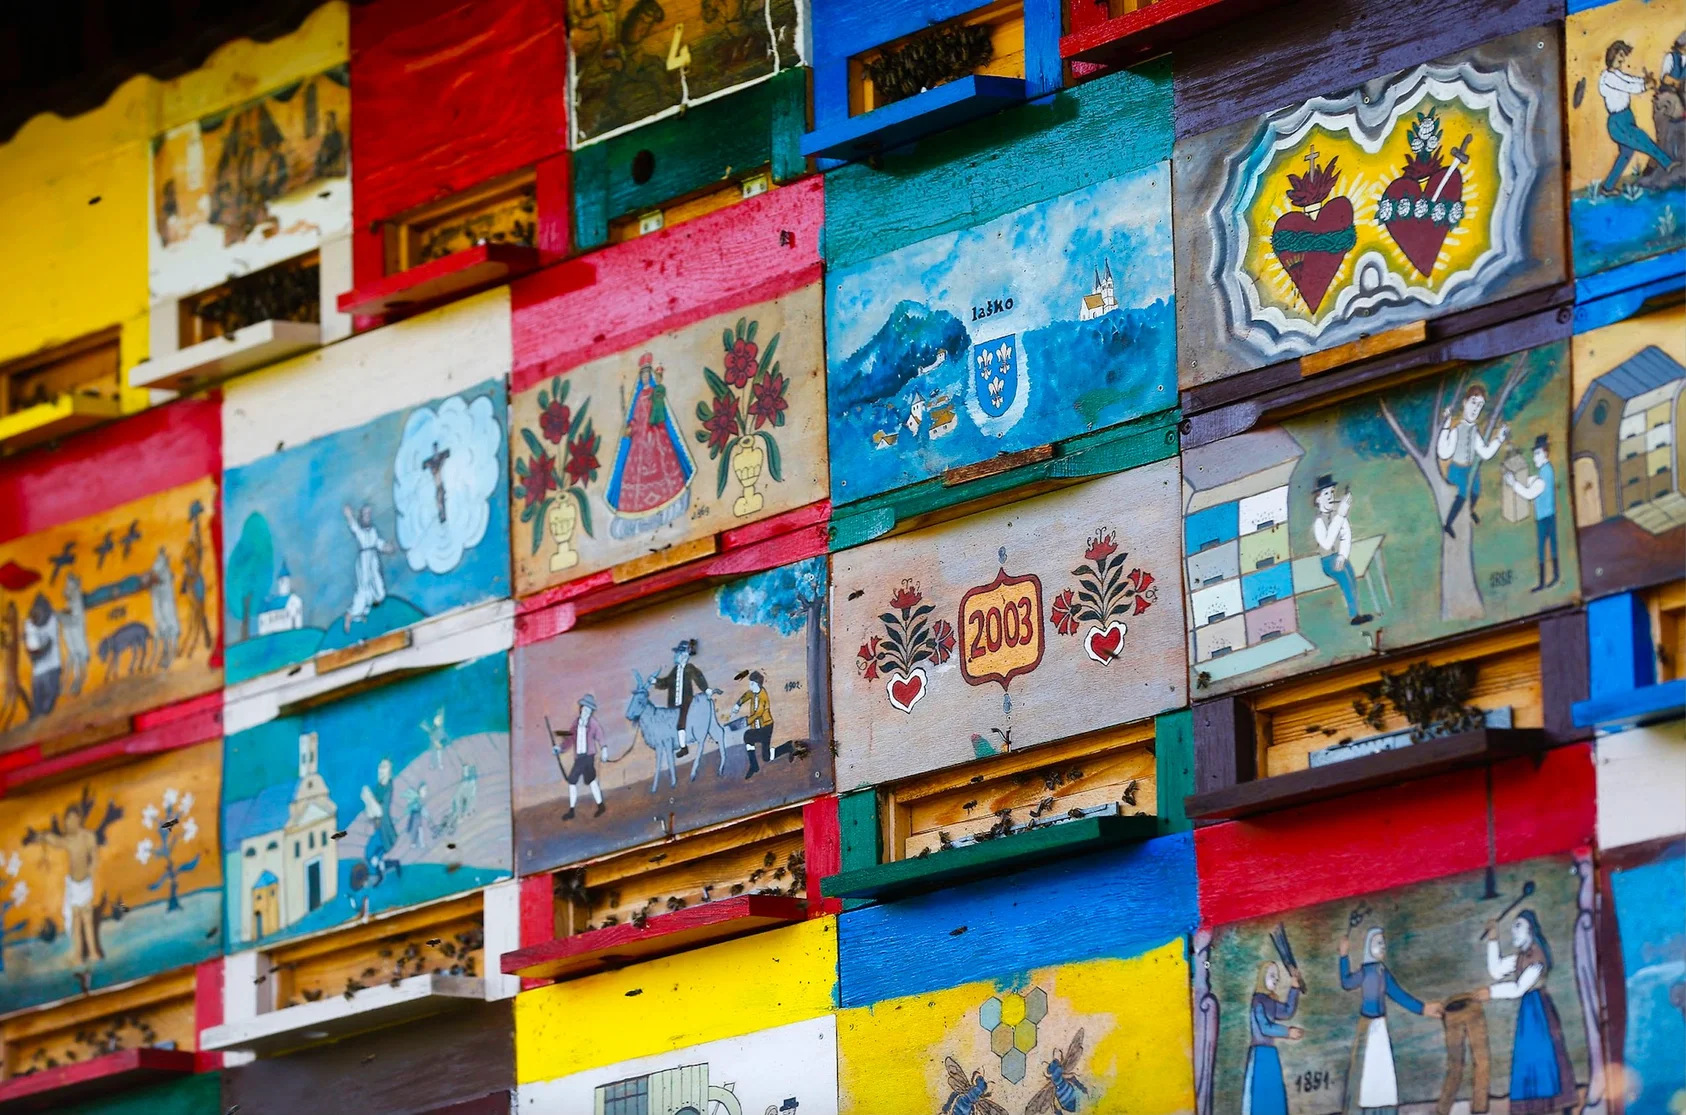 A wall of beehive panels, all of which have been painted brightly with different illustrations of people, landscapes and symbols like hearts